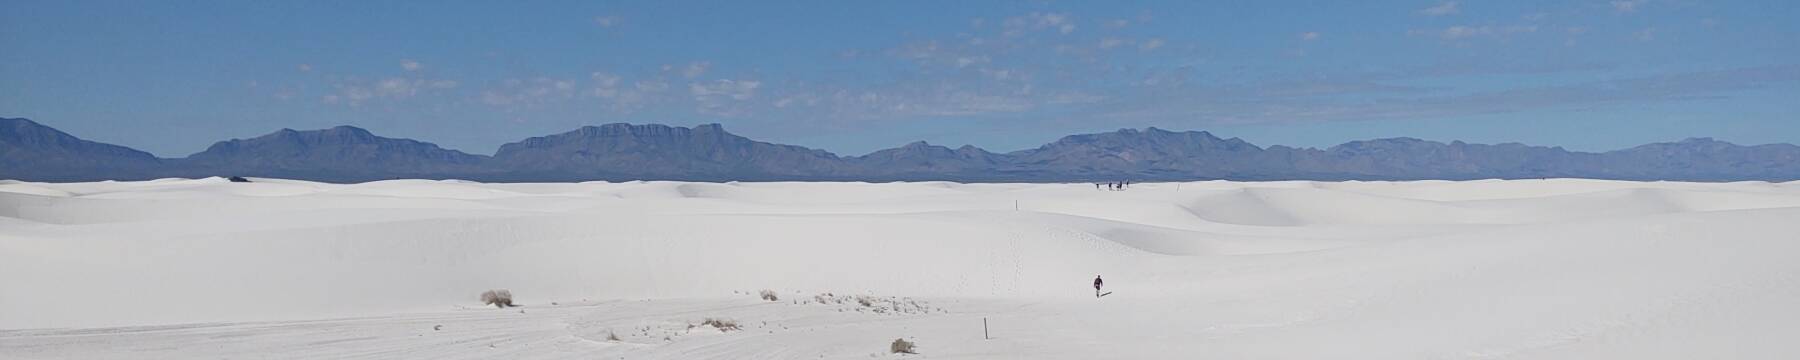 People in the distance on white gypsum dunes at White Sands National Park.